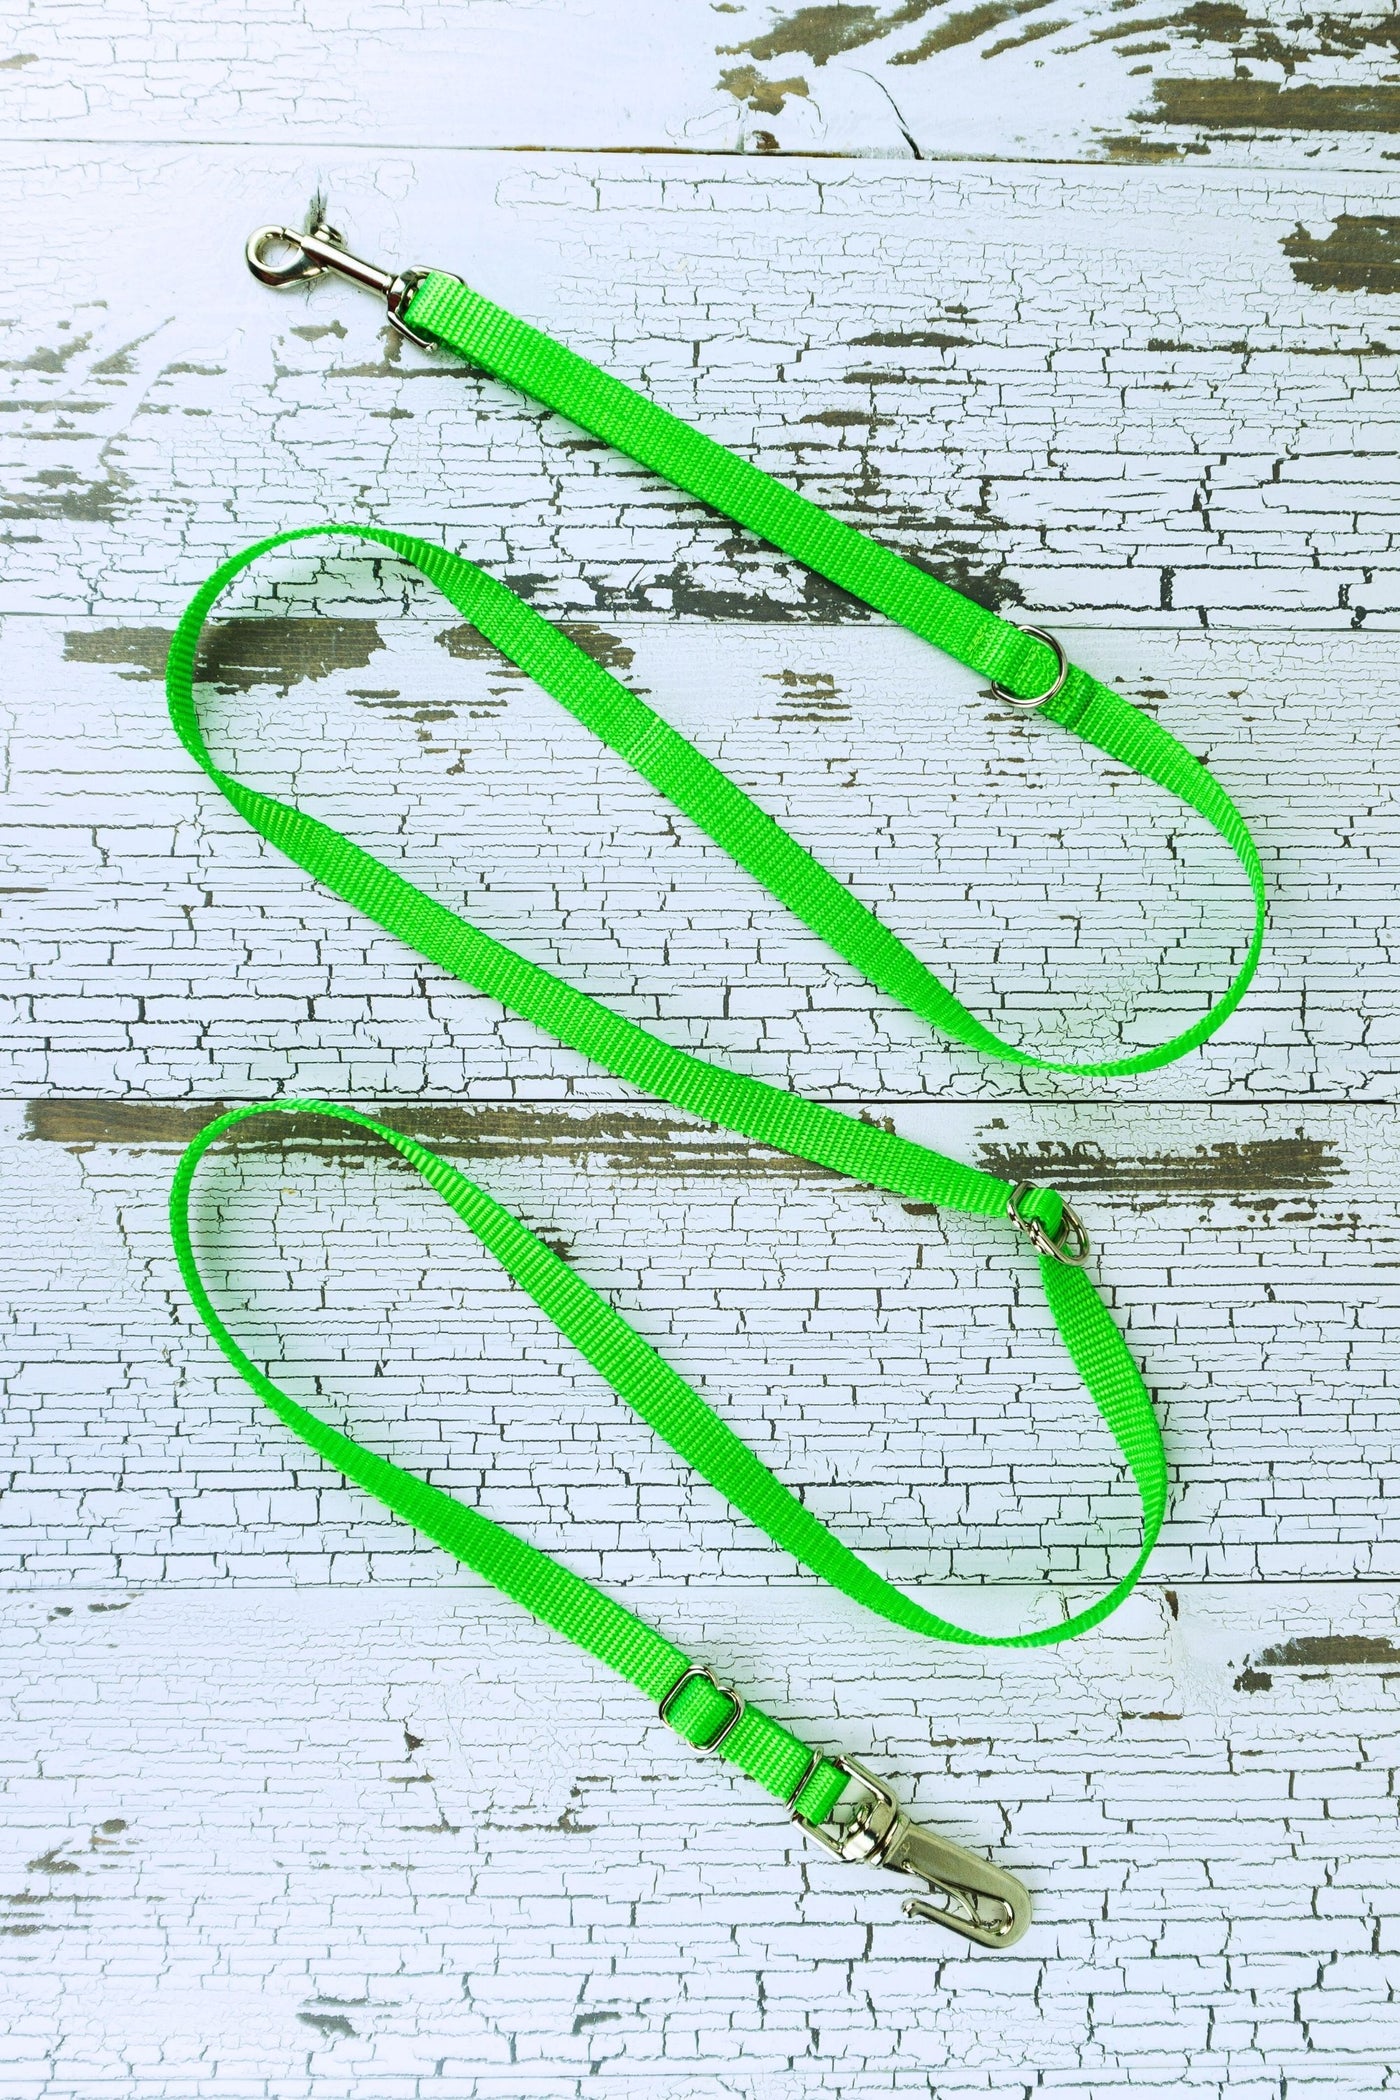 Three way adjustable and convertible leash for small dogs is shown in a flat configuration, made in a neon green webbing.